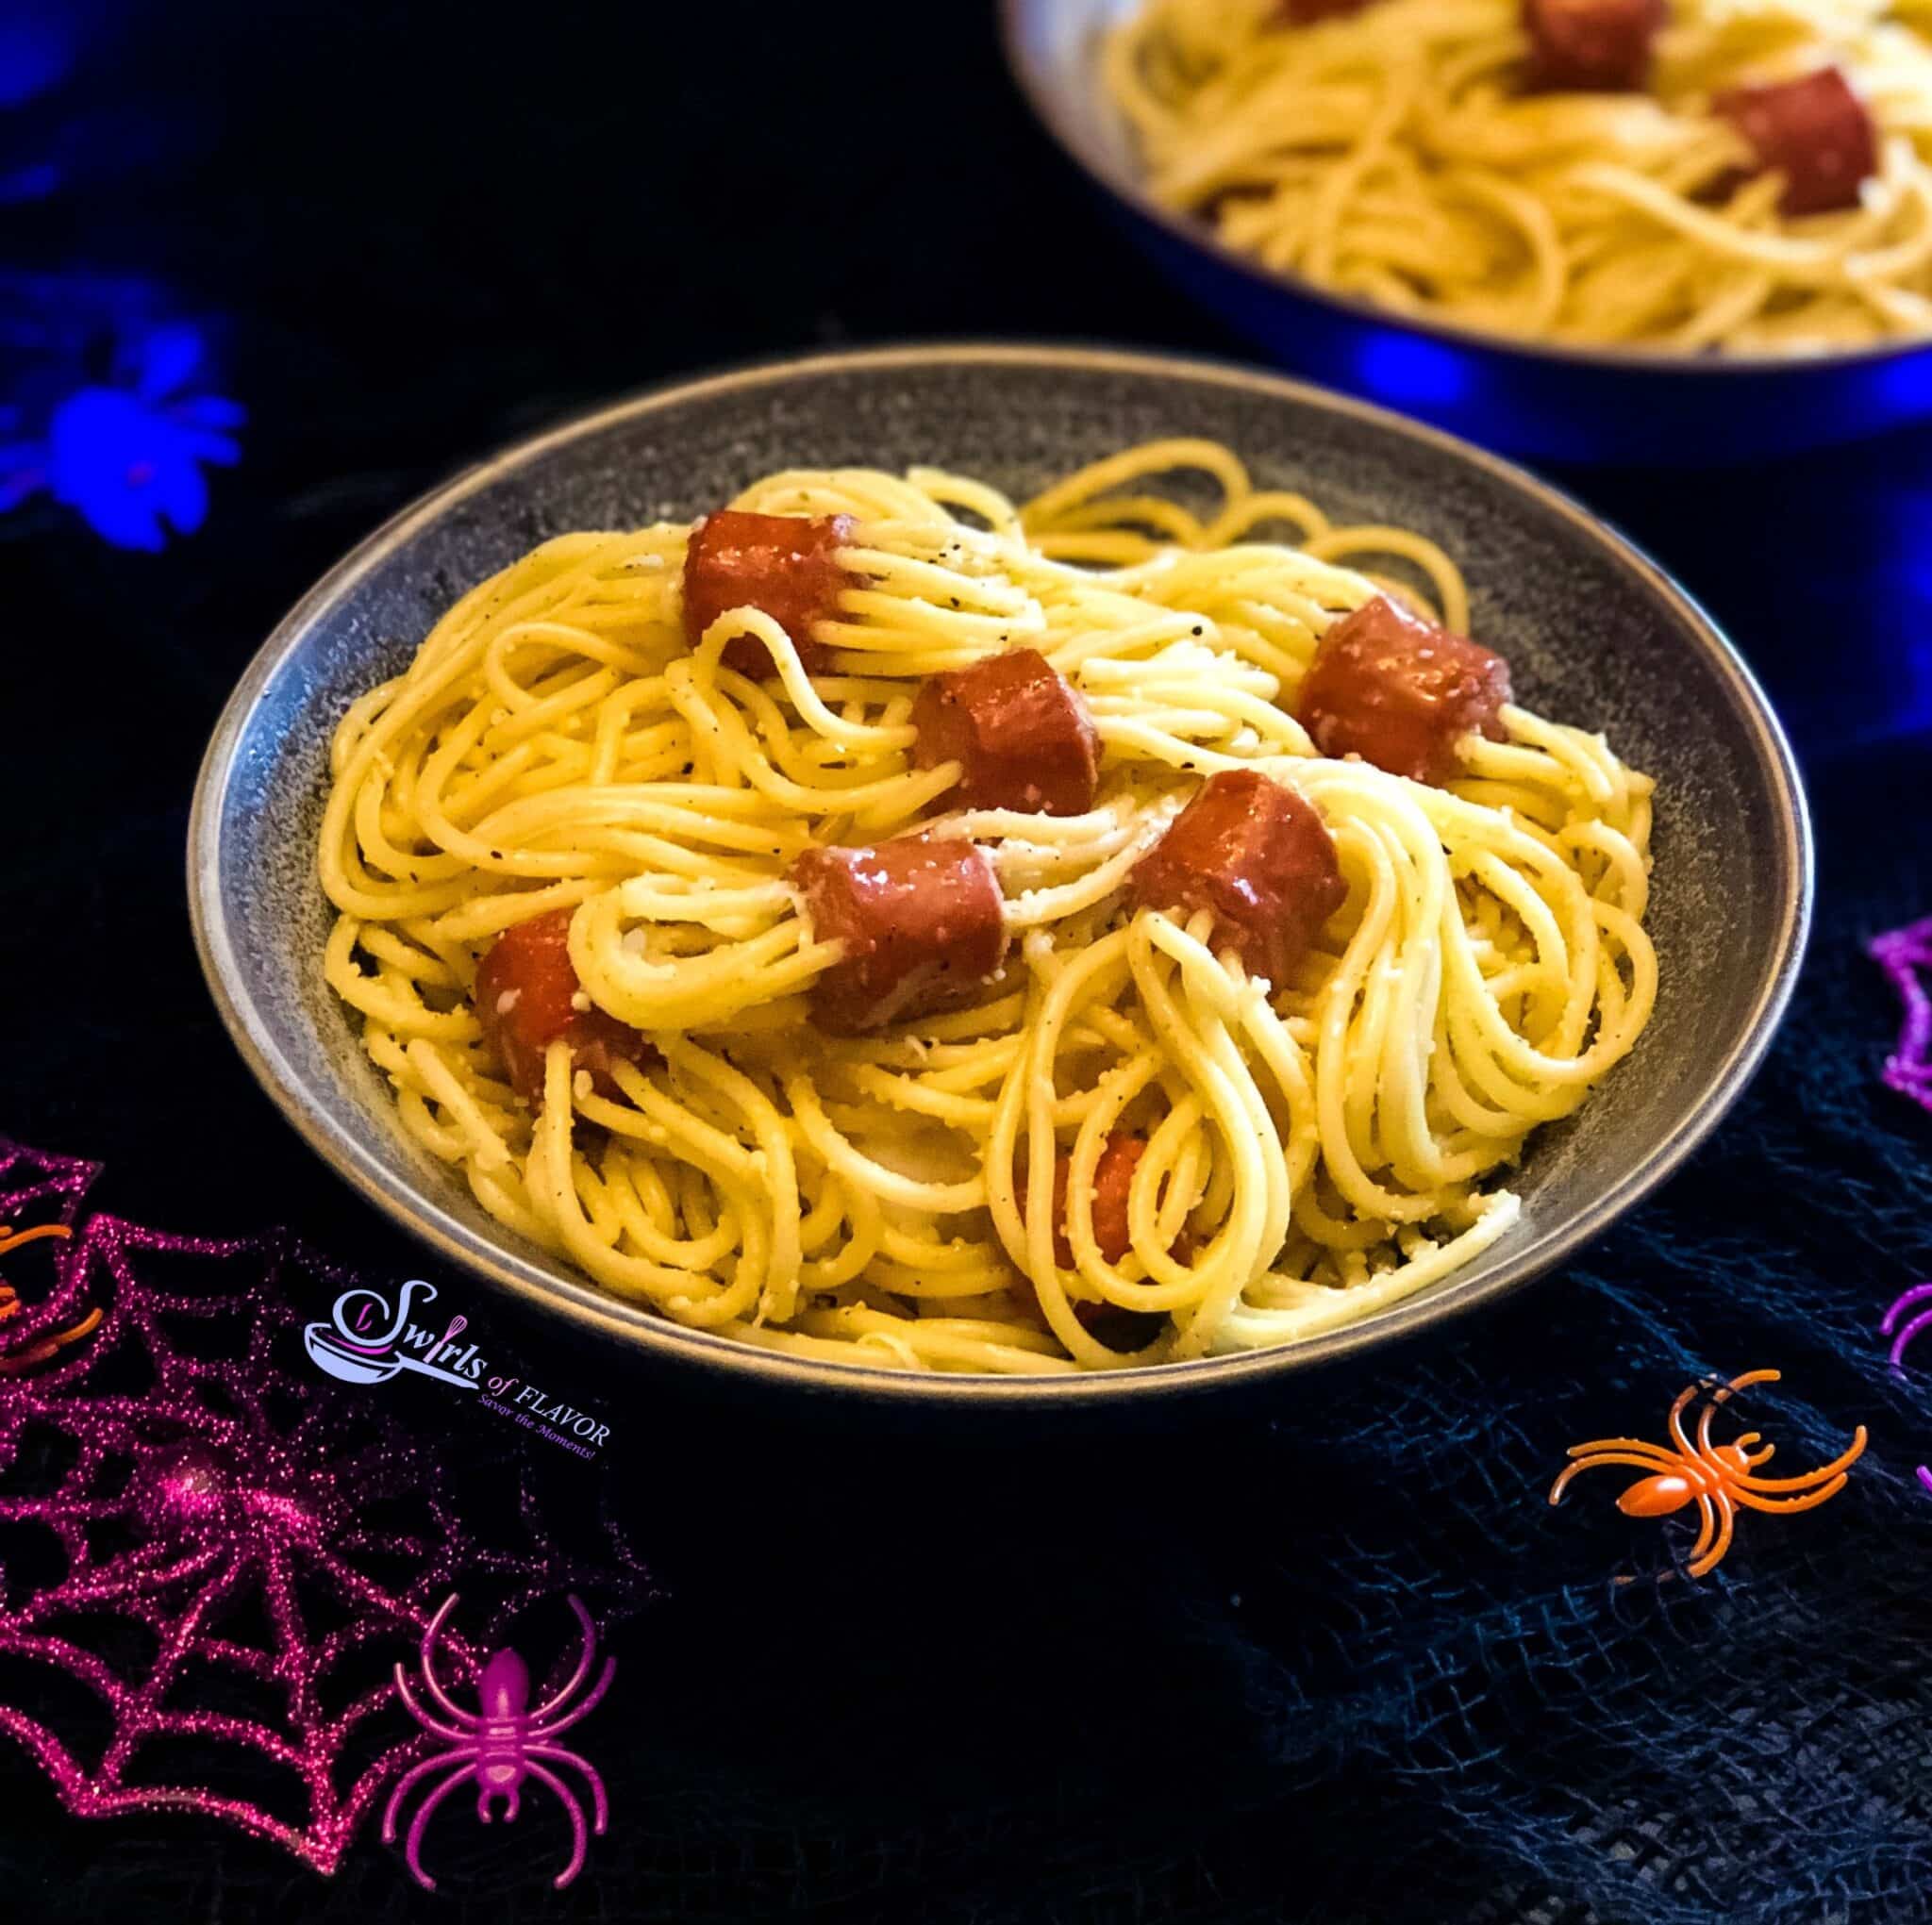 Hot dog spaghetti served in a bowl on a dark background.